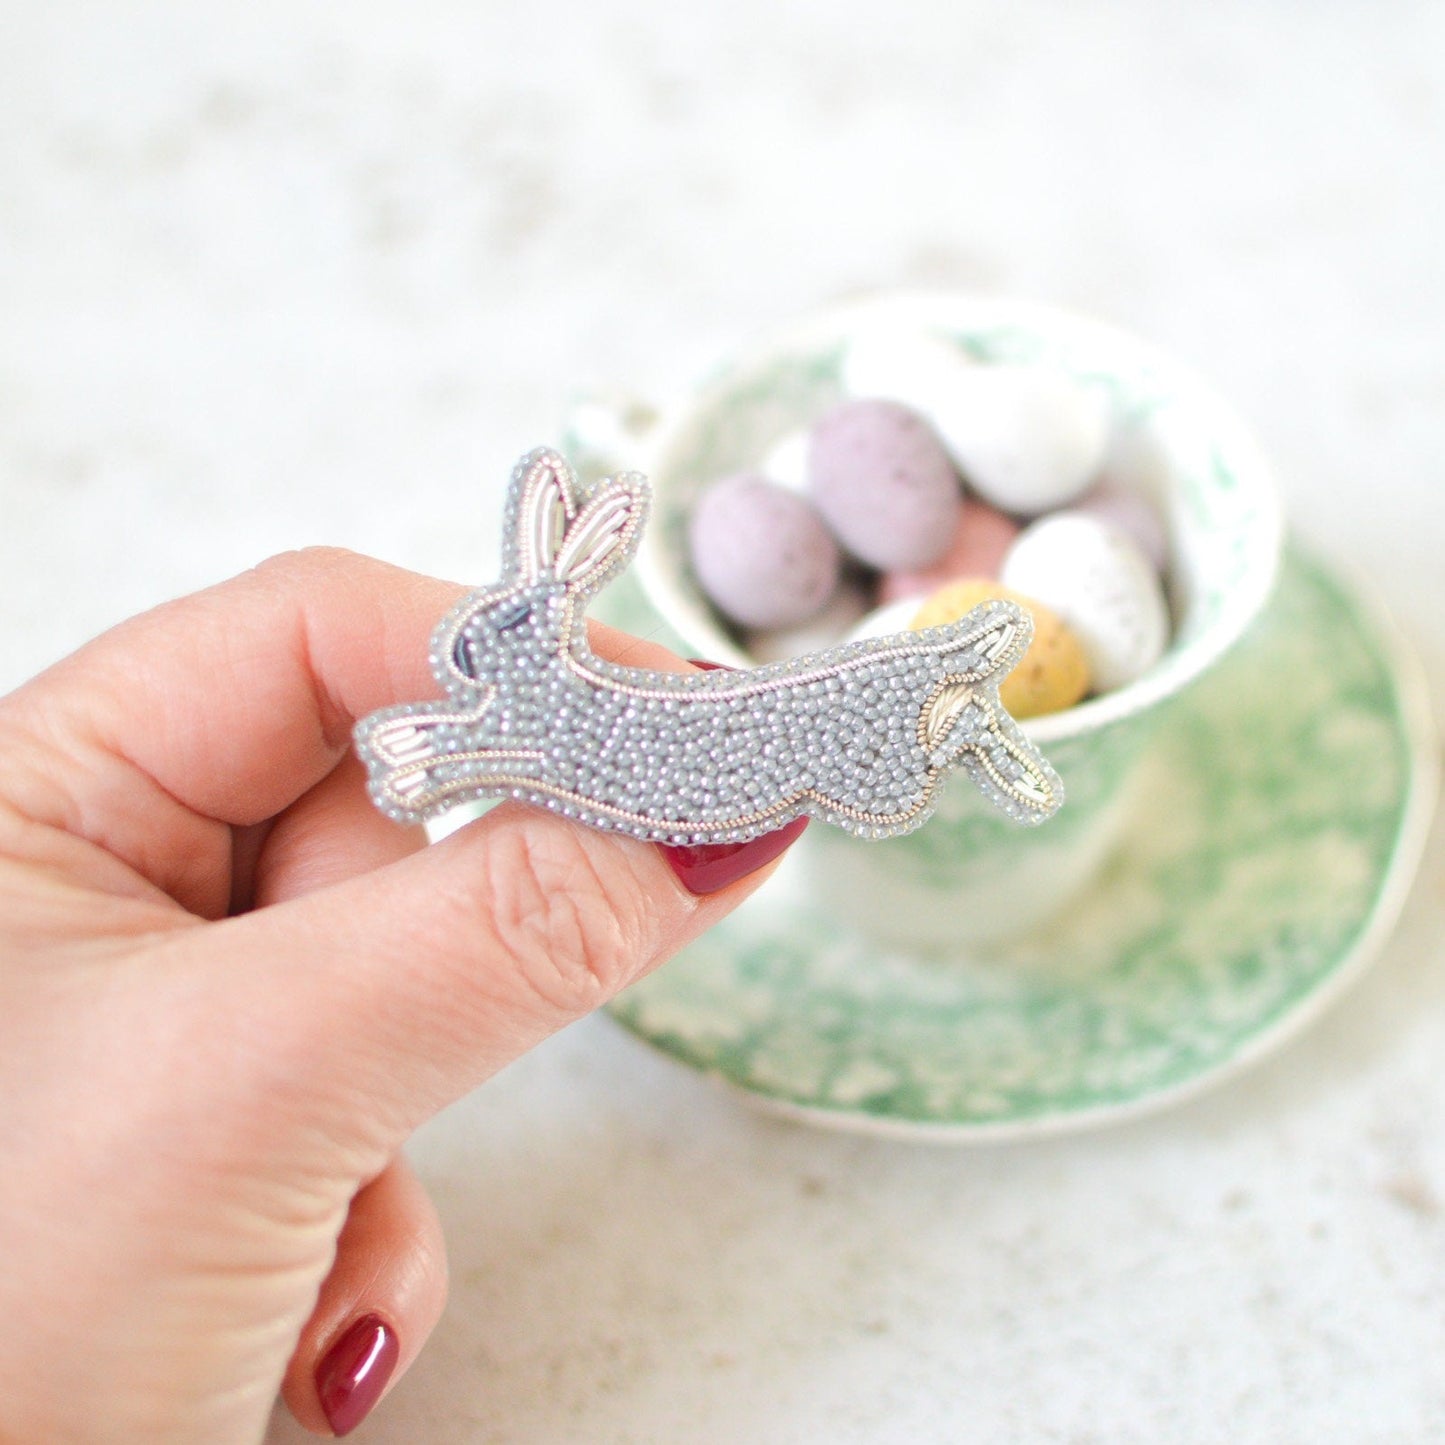 Leaping Hare Bead Embroidery Brooch